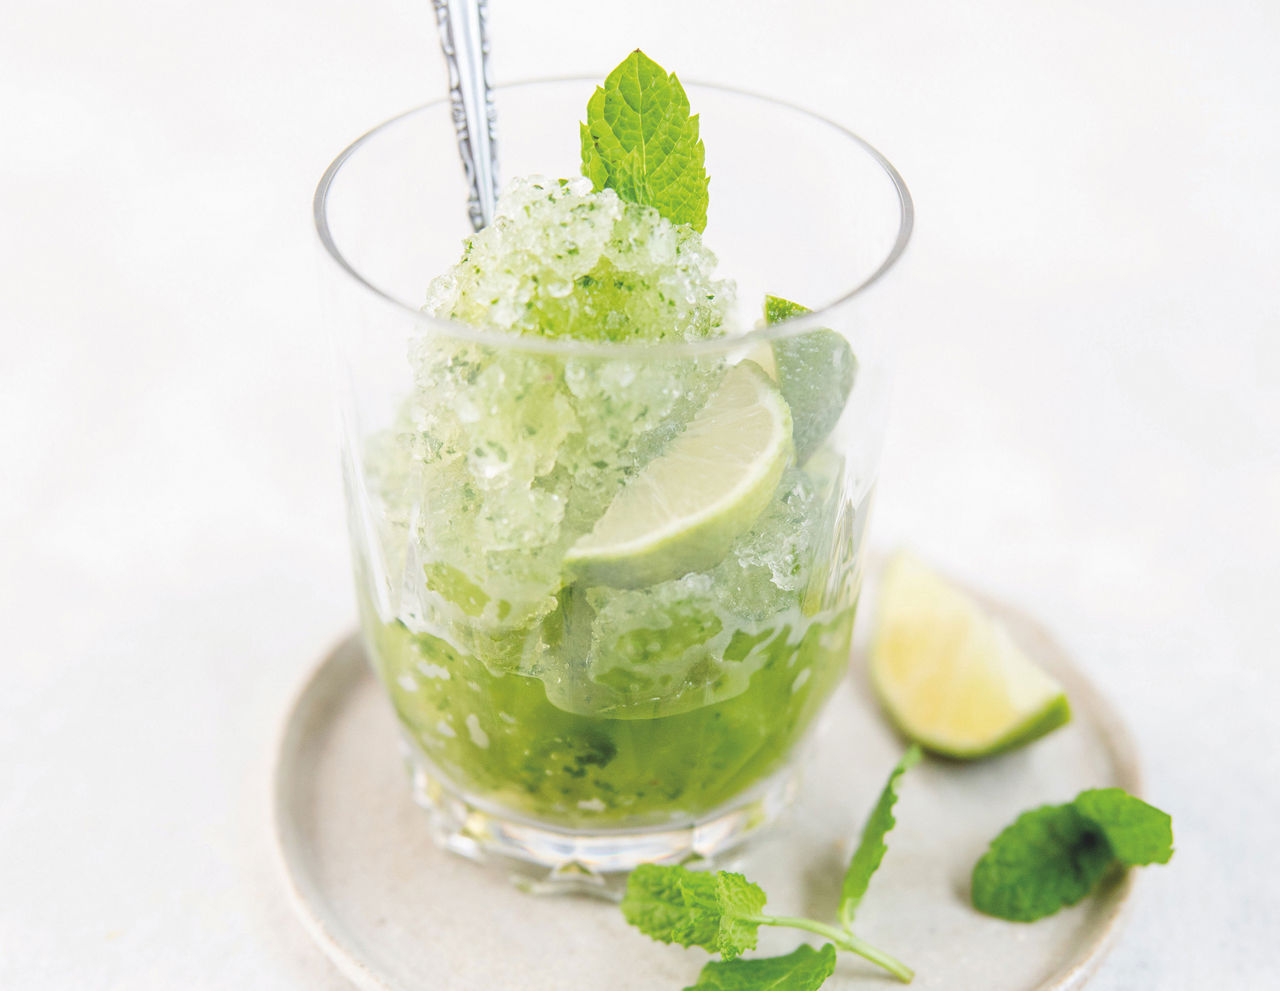 A glass of ice nojito with lime and fresh mint leaves